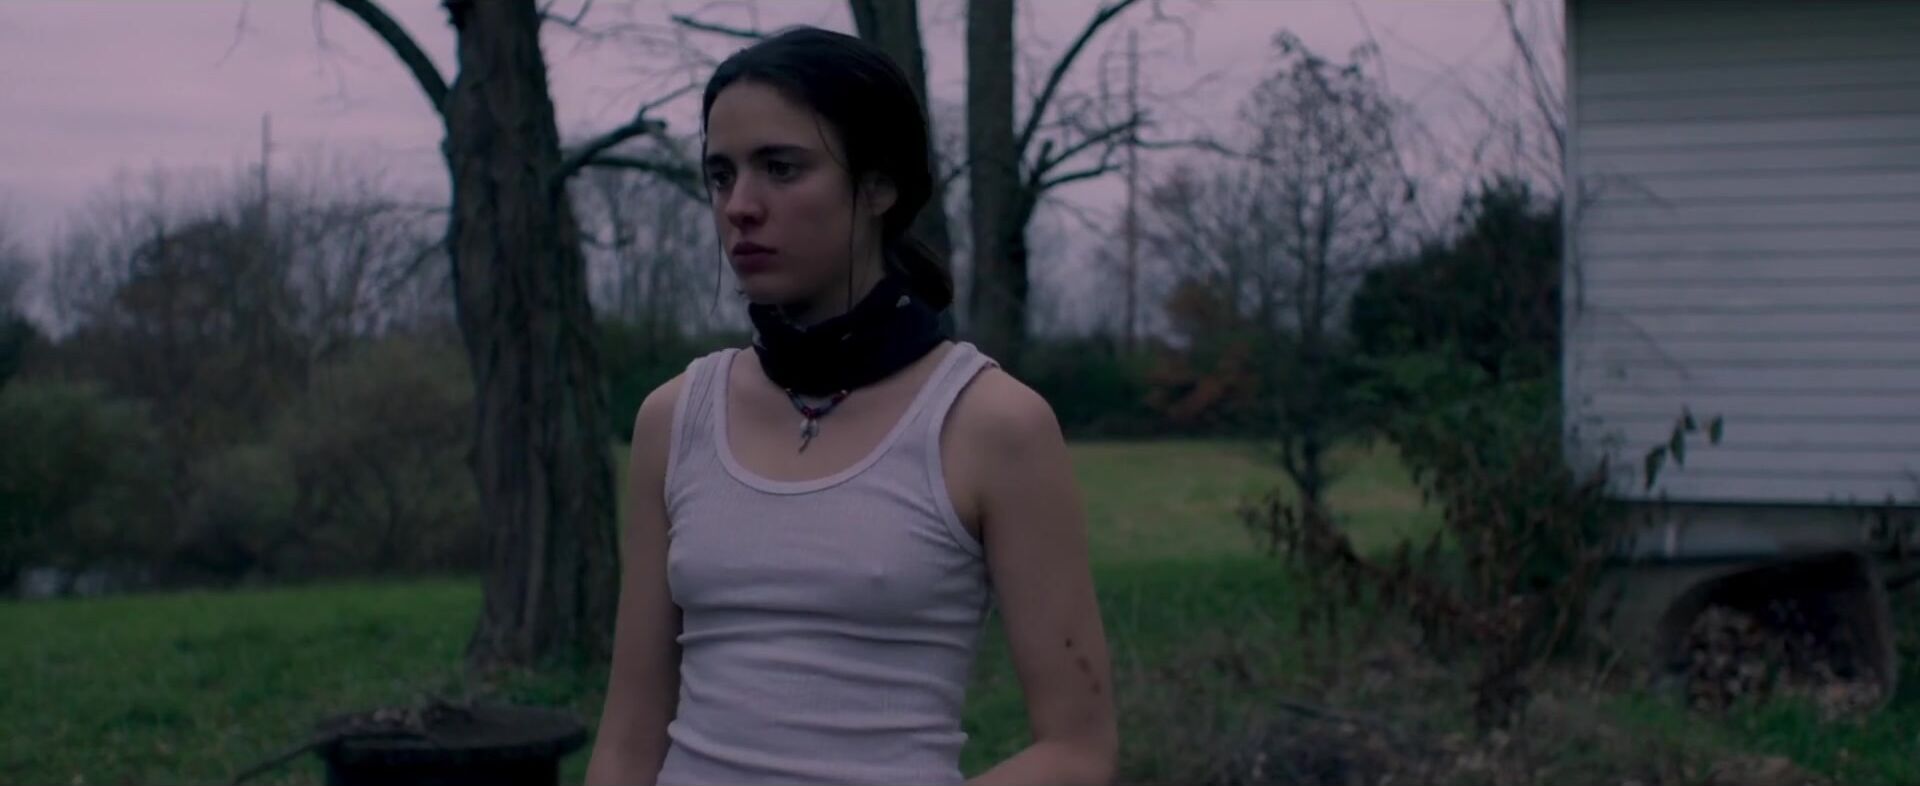 Pick Up Nude and sex moments of skinny sexual pervert Margaret Qualley from Donnybrook (2018) Real